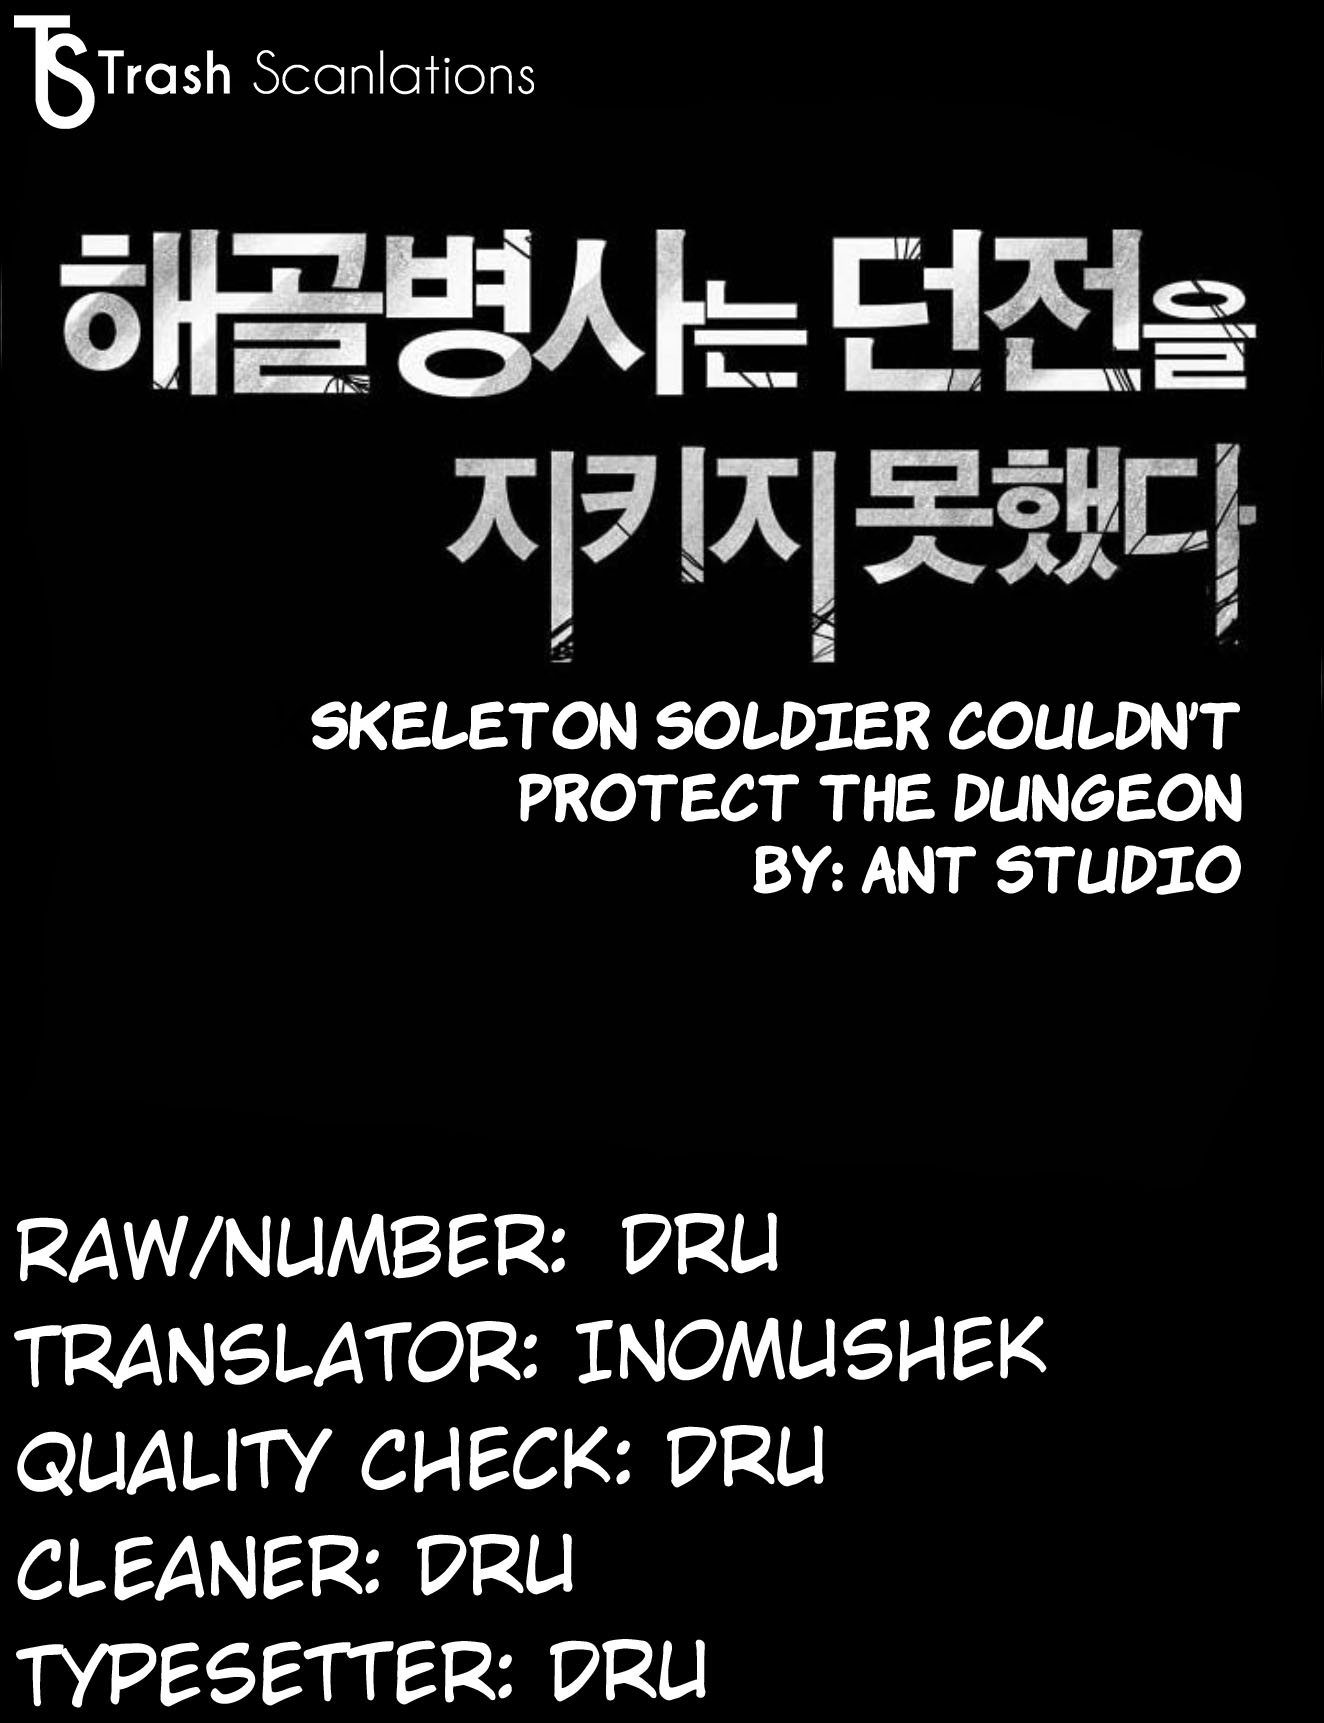 Skeleton Soldier Couldn't Protect the Dungeon - Chapter 2909 - Image 1